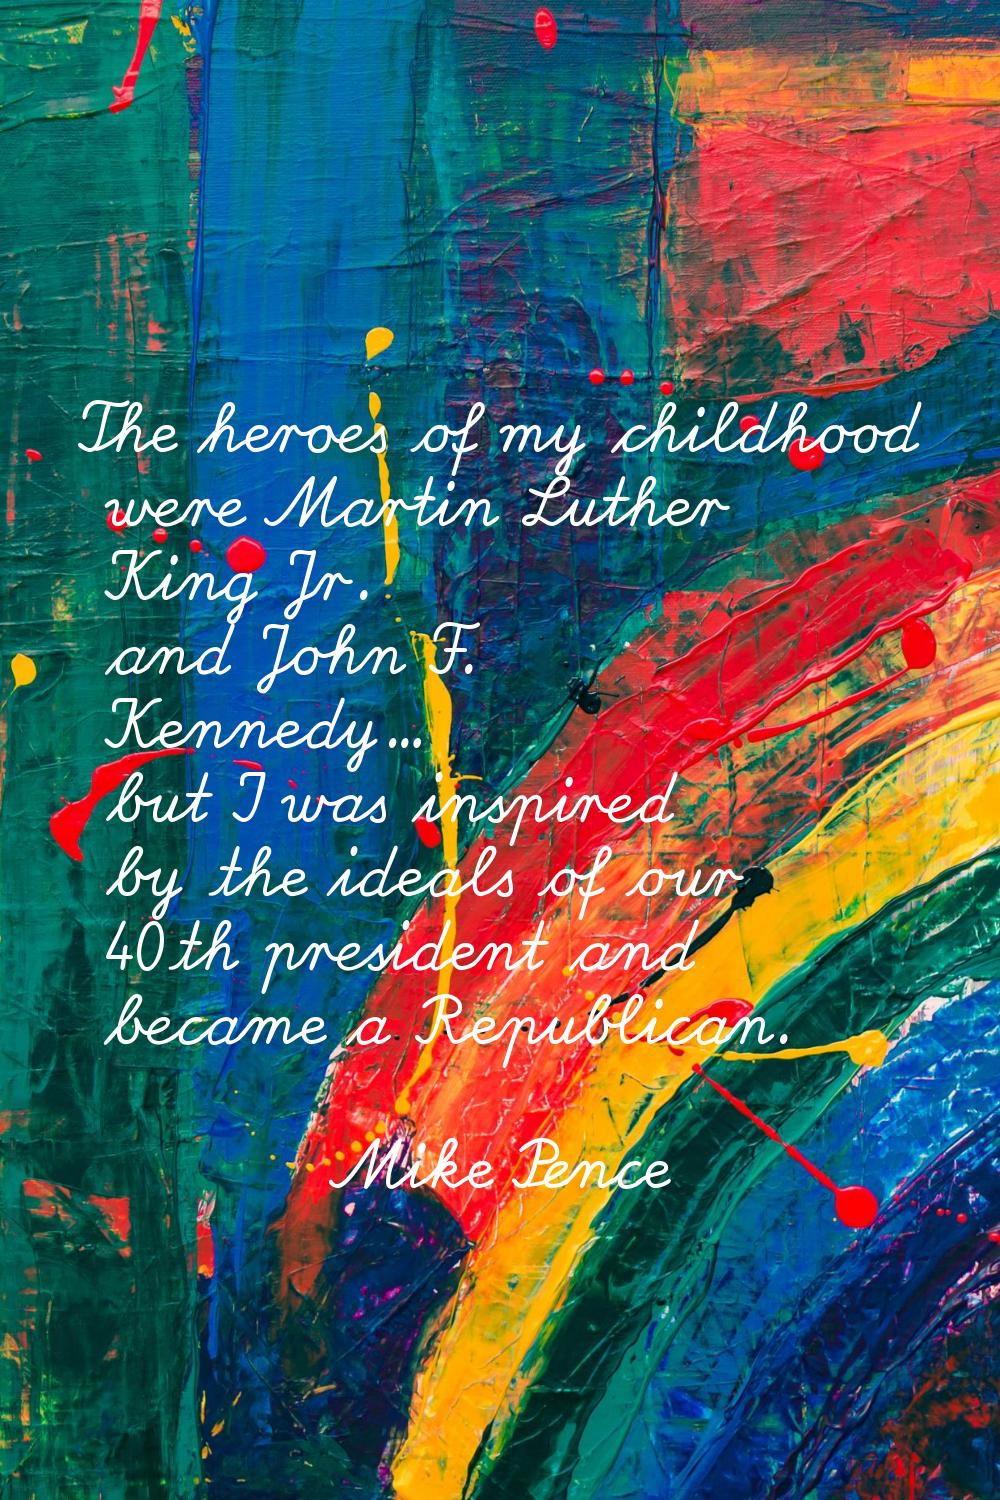 The heroes of my childhood were Martin Luther King Jr. and John F. Kennedy... but I was inspired by